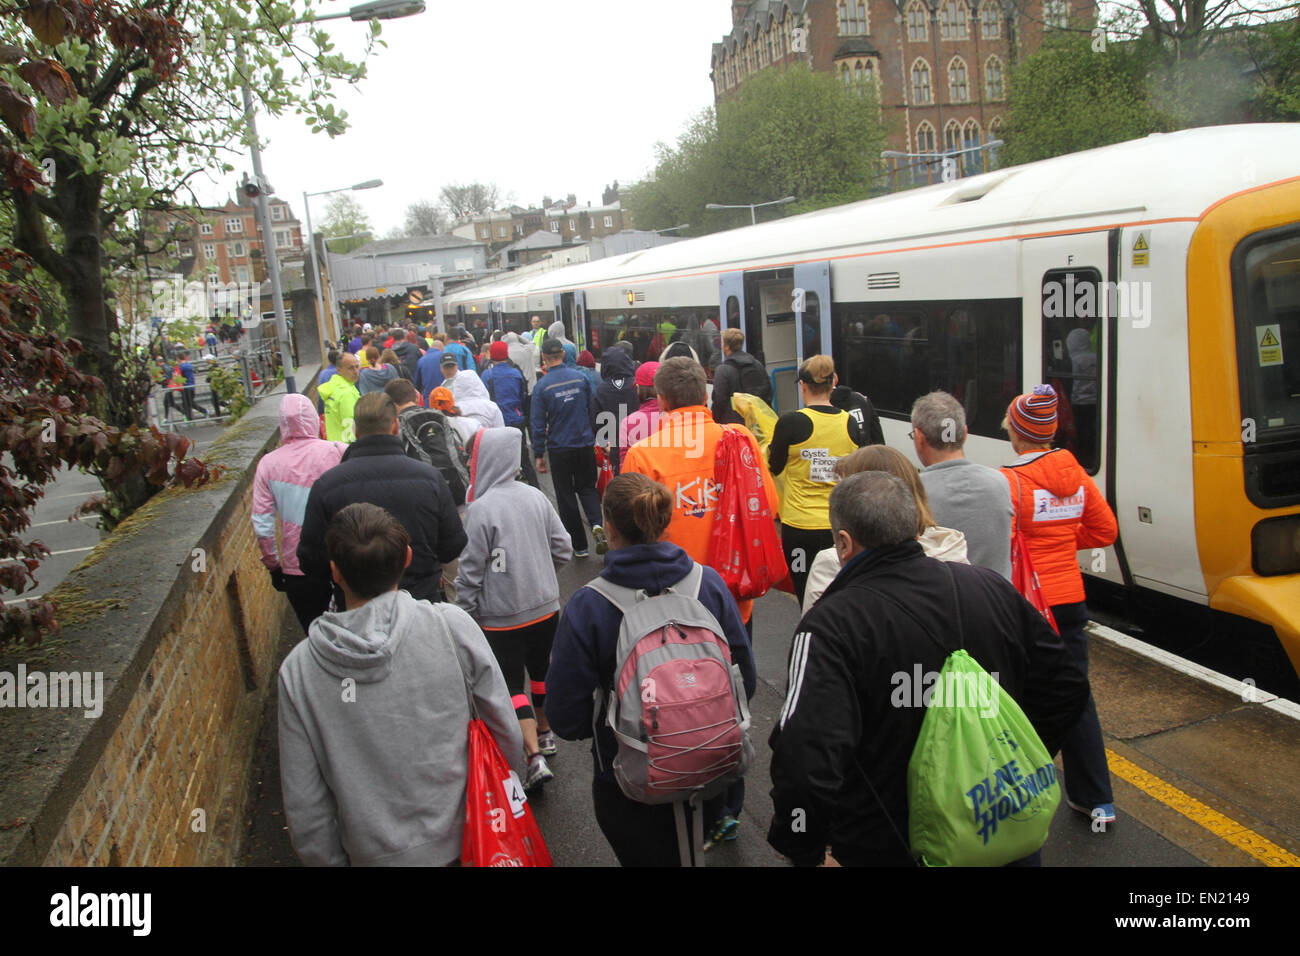 London, UK. 26th April 2015. Hundreds prepare to undertake the 26 mile run of  the annual London Marathon.The 35th London Marathon is sponsored by Virgin Money and holds the Guinness world record as the largest annual fund raising event in the world. Course records are 2:04:29 (2014) Wilson Kipsang and on the women's: 2:15:25 (2003) Paula Radcliffe. Photo: Credit:  david mbiyu/Alamy Live News Stock Photo